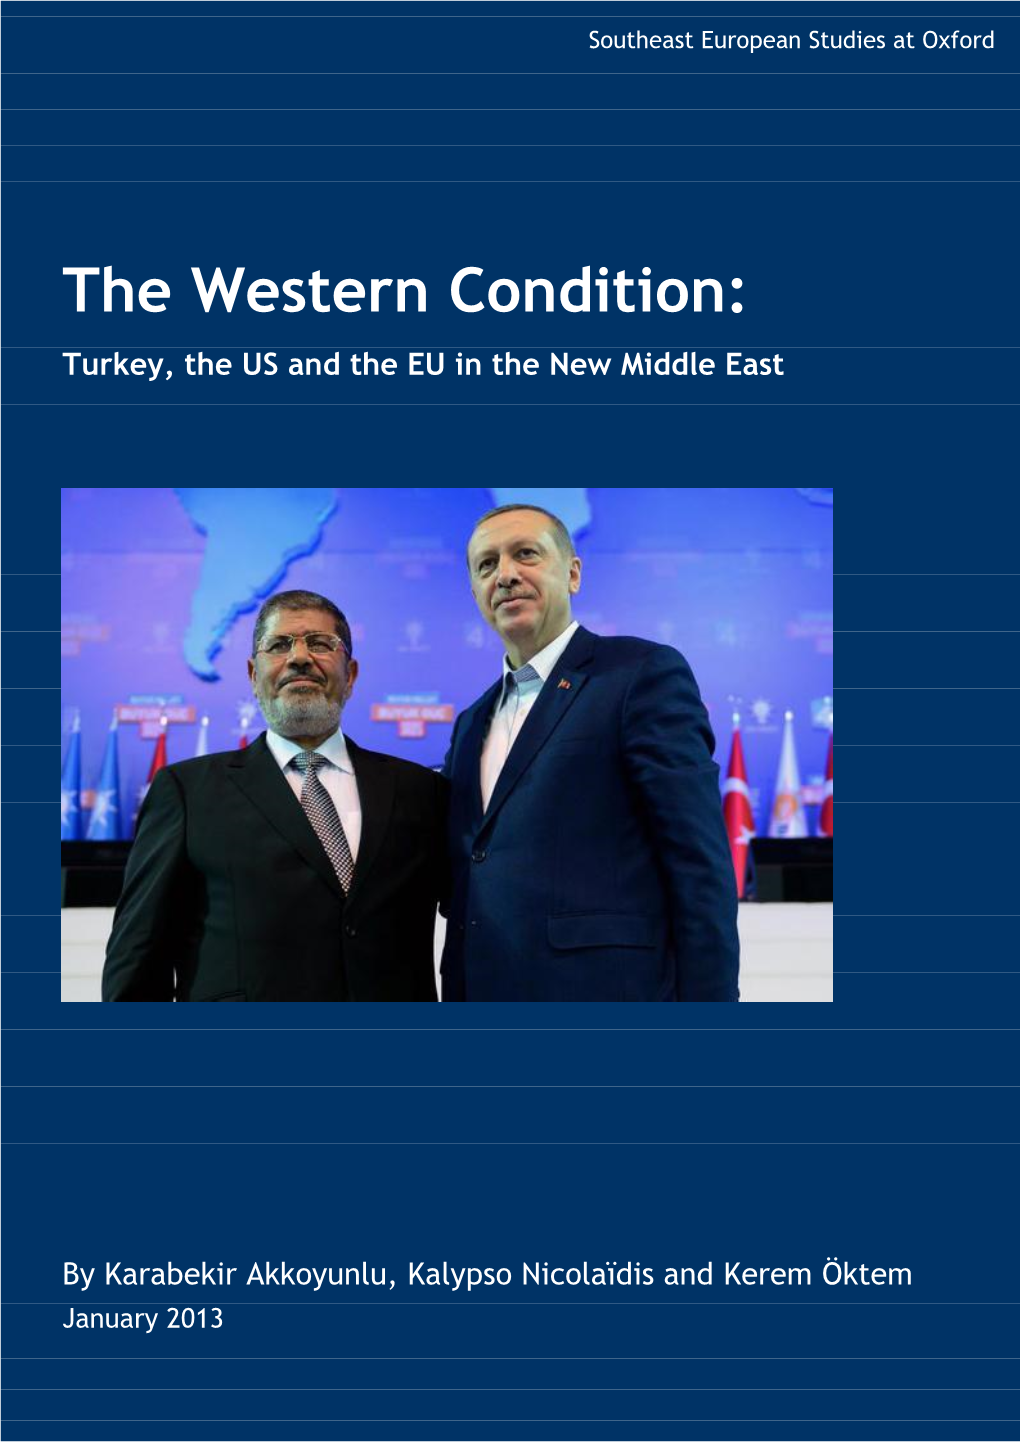 The Western Condition: Turkey, the US and the EU in the New Middle East